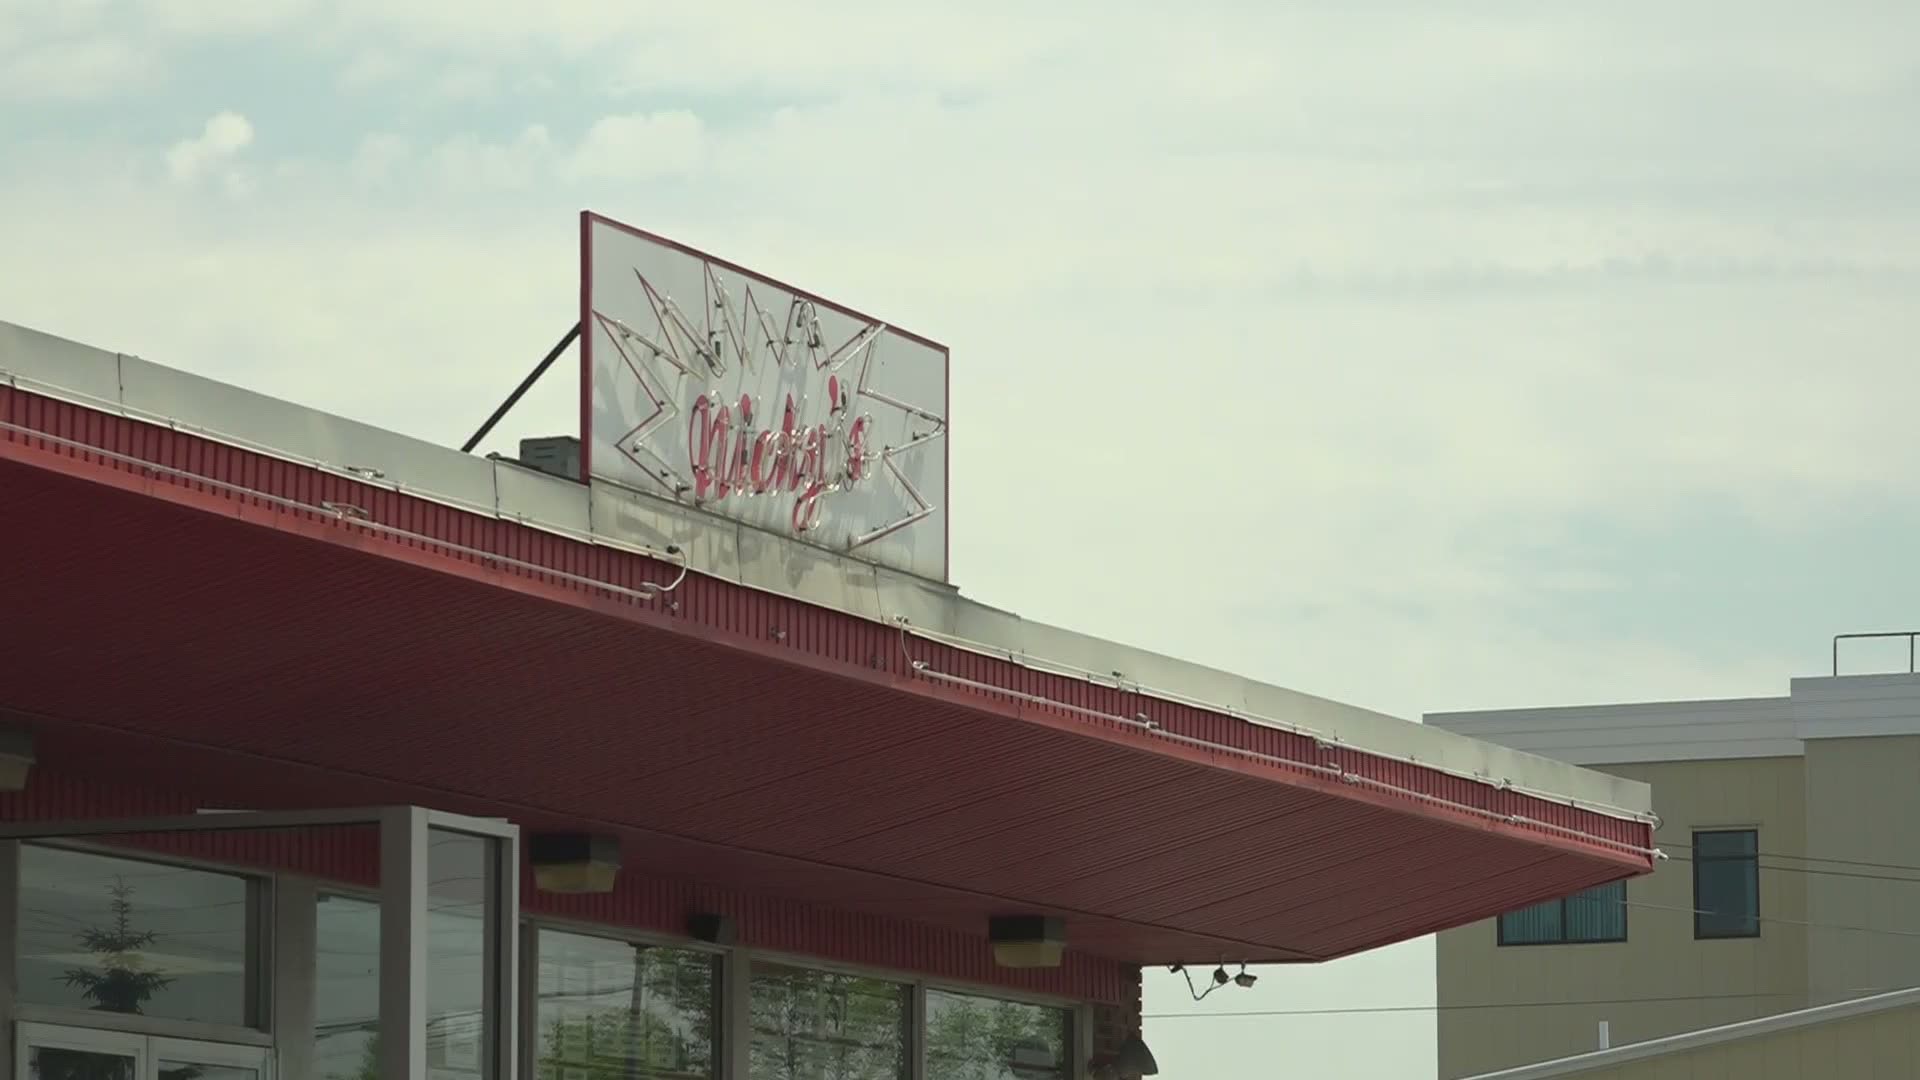 Nicky's Cruisin' Diner will say a final goodbye to its loyal customers on Tuesday.